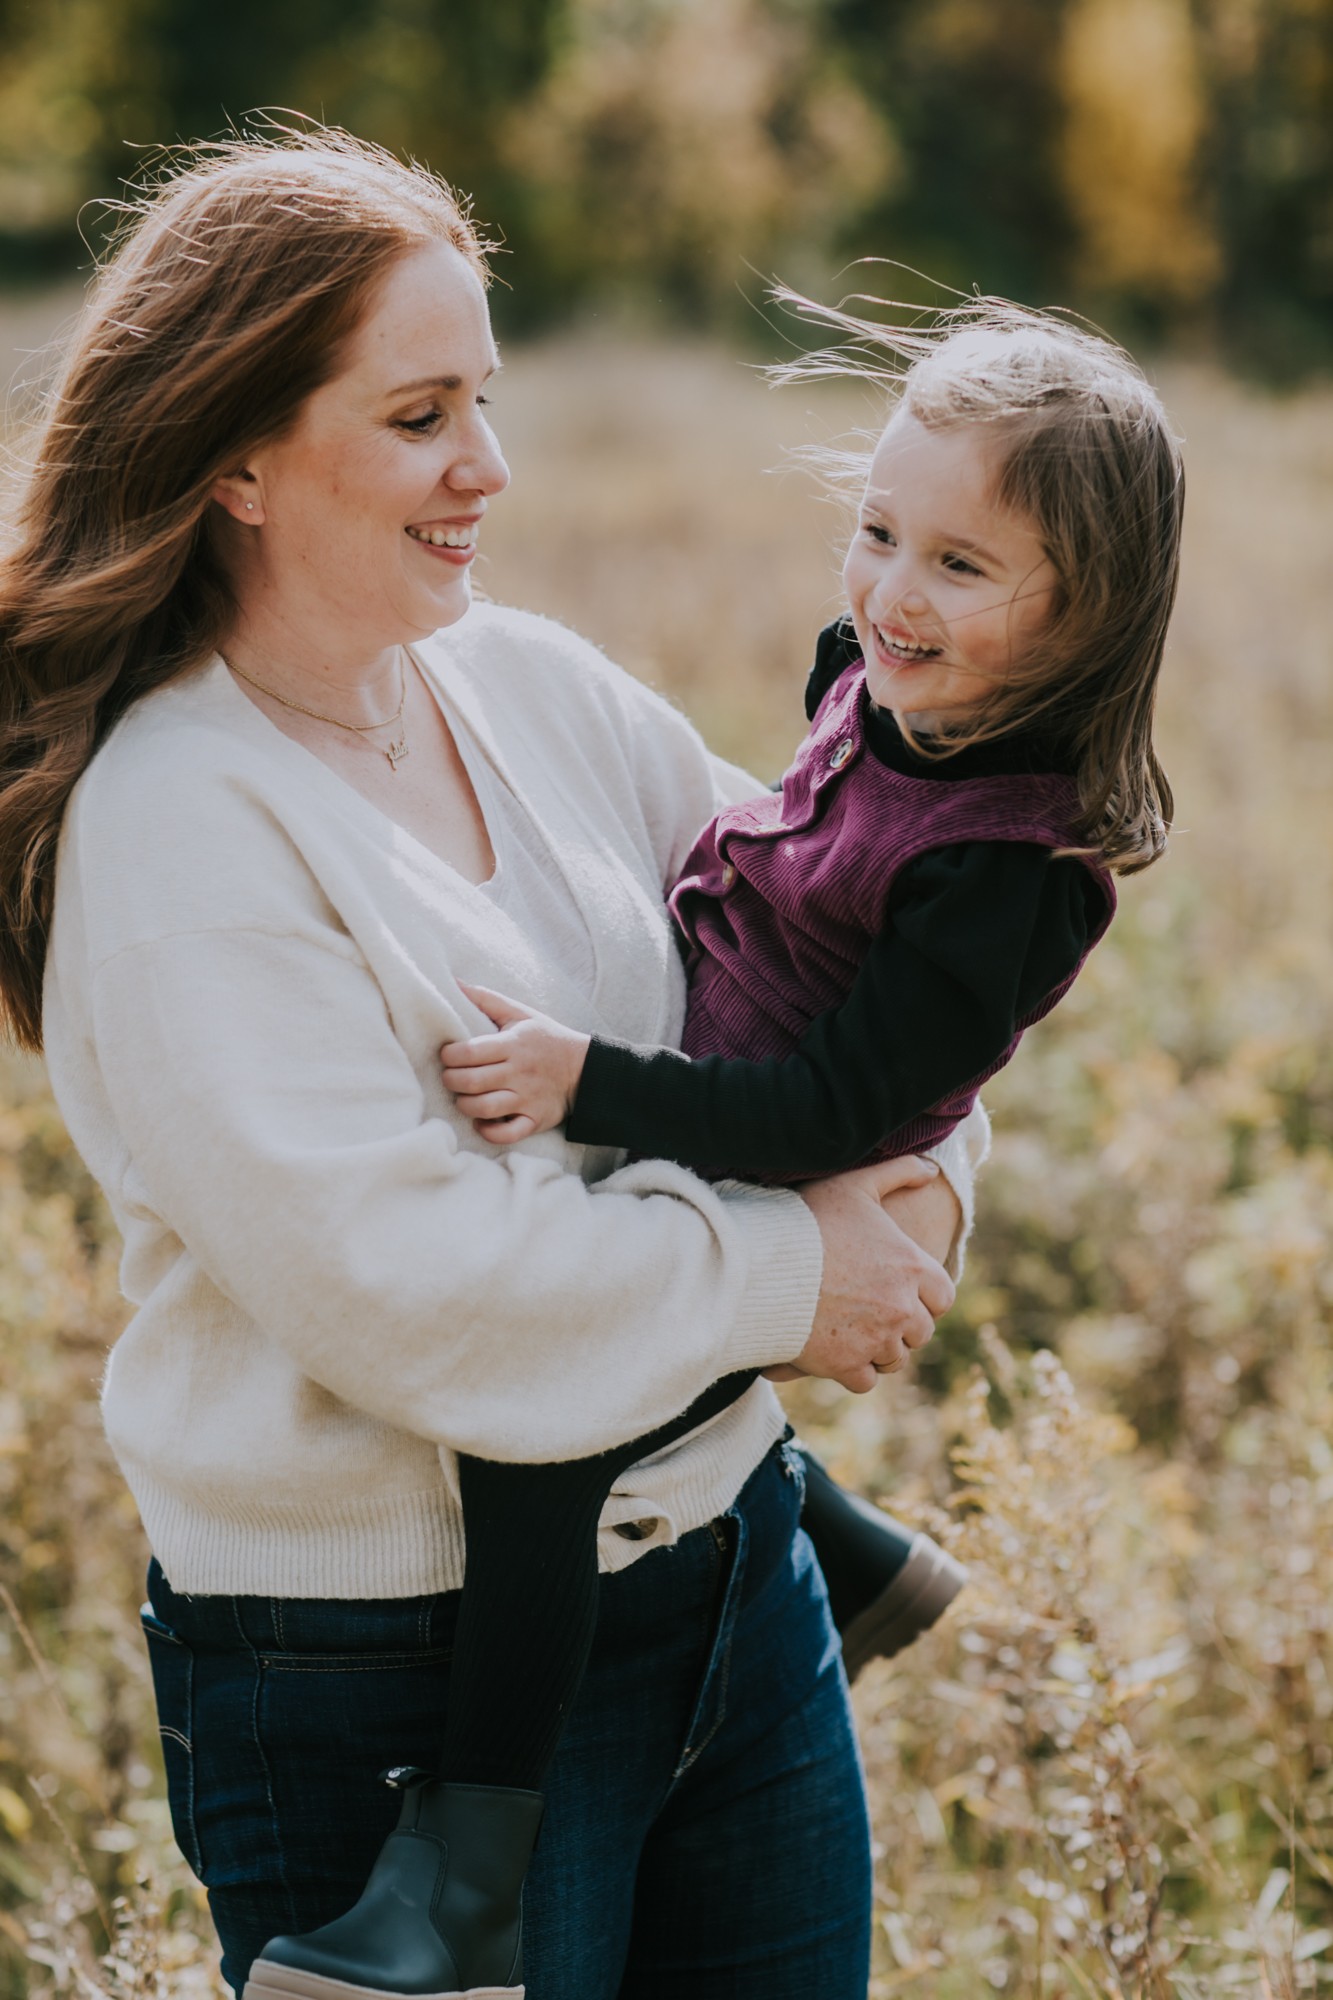 mother and daughter laugh in grassy field